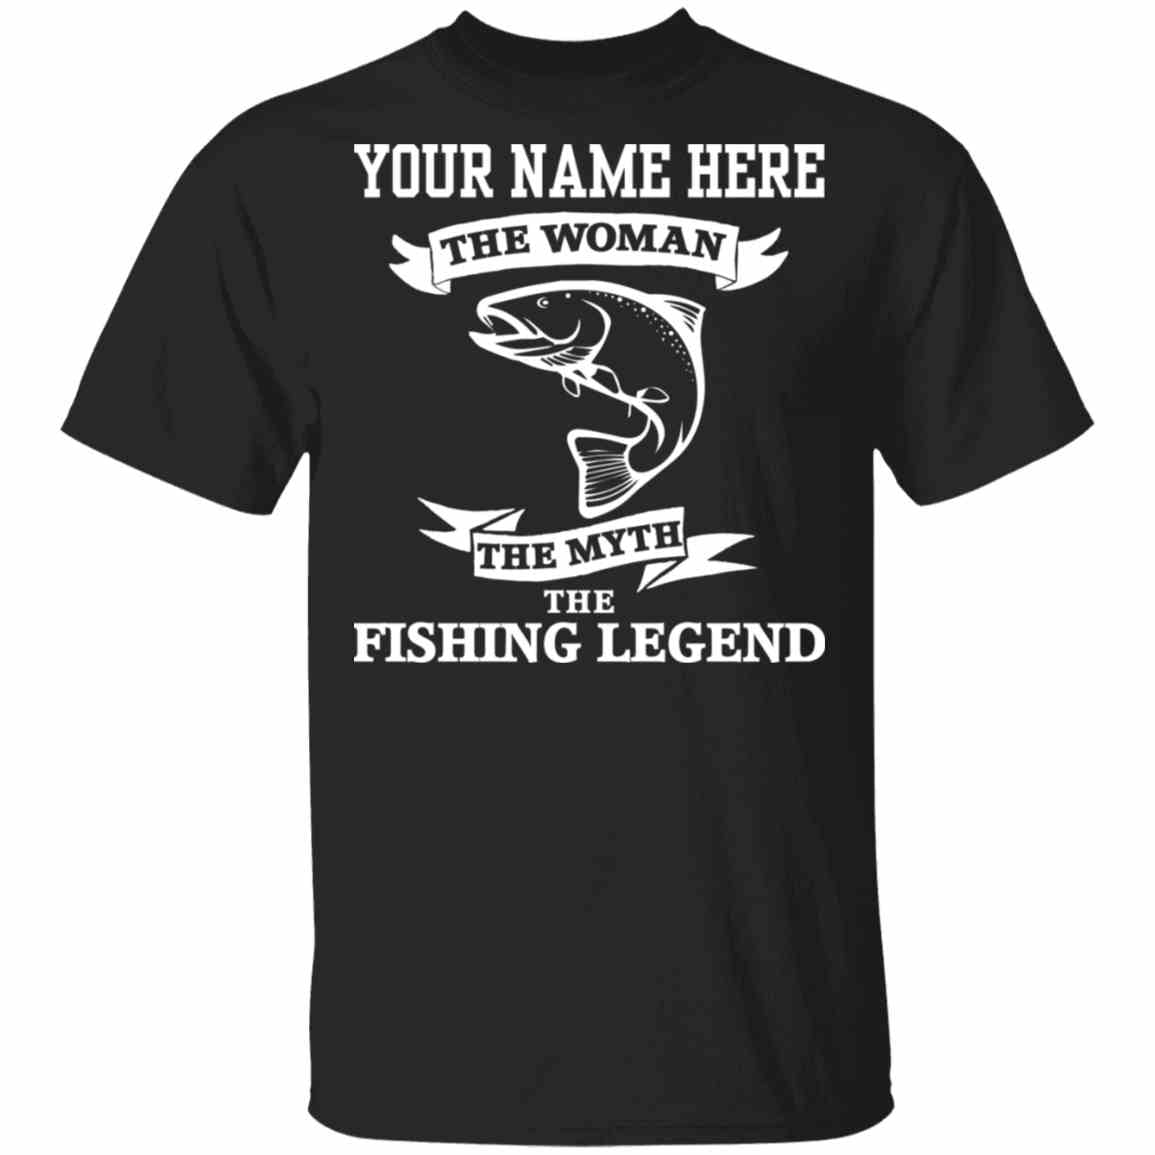 Personalized the woman the myth the fishing legend t-shirt w black